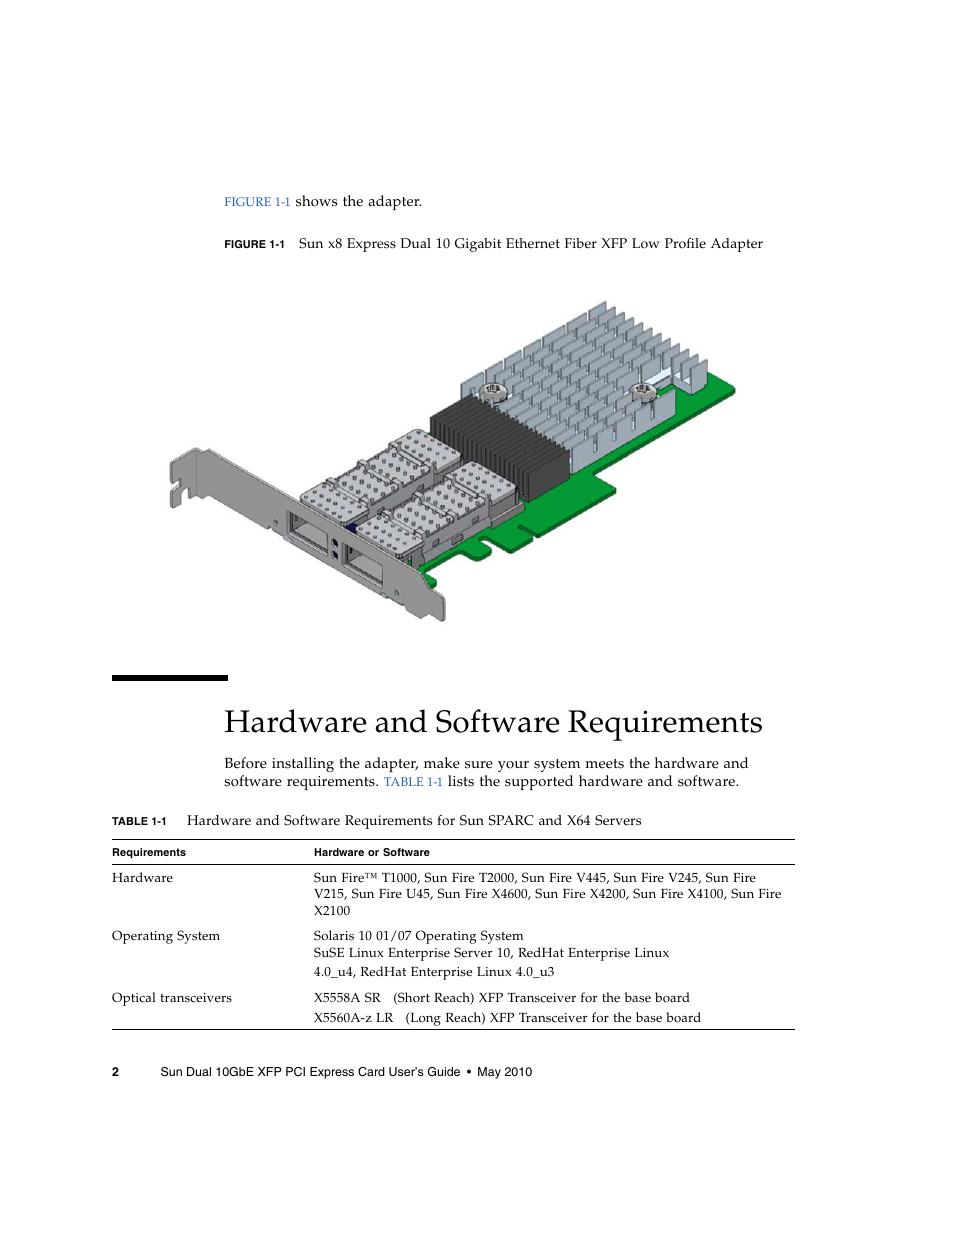 Hardware and software requirements | Oracle Audio Technologies Sun Oracle SunDual 10GbE XFP User Manual | Page 12 / 86